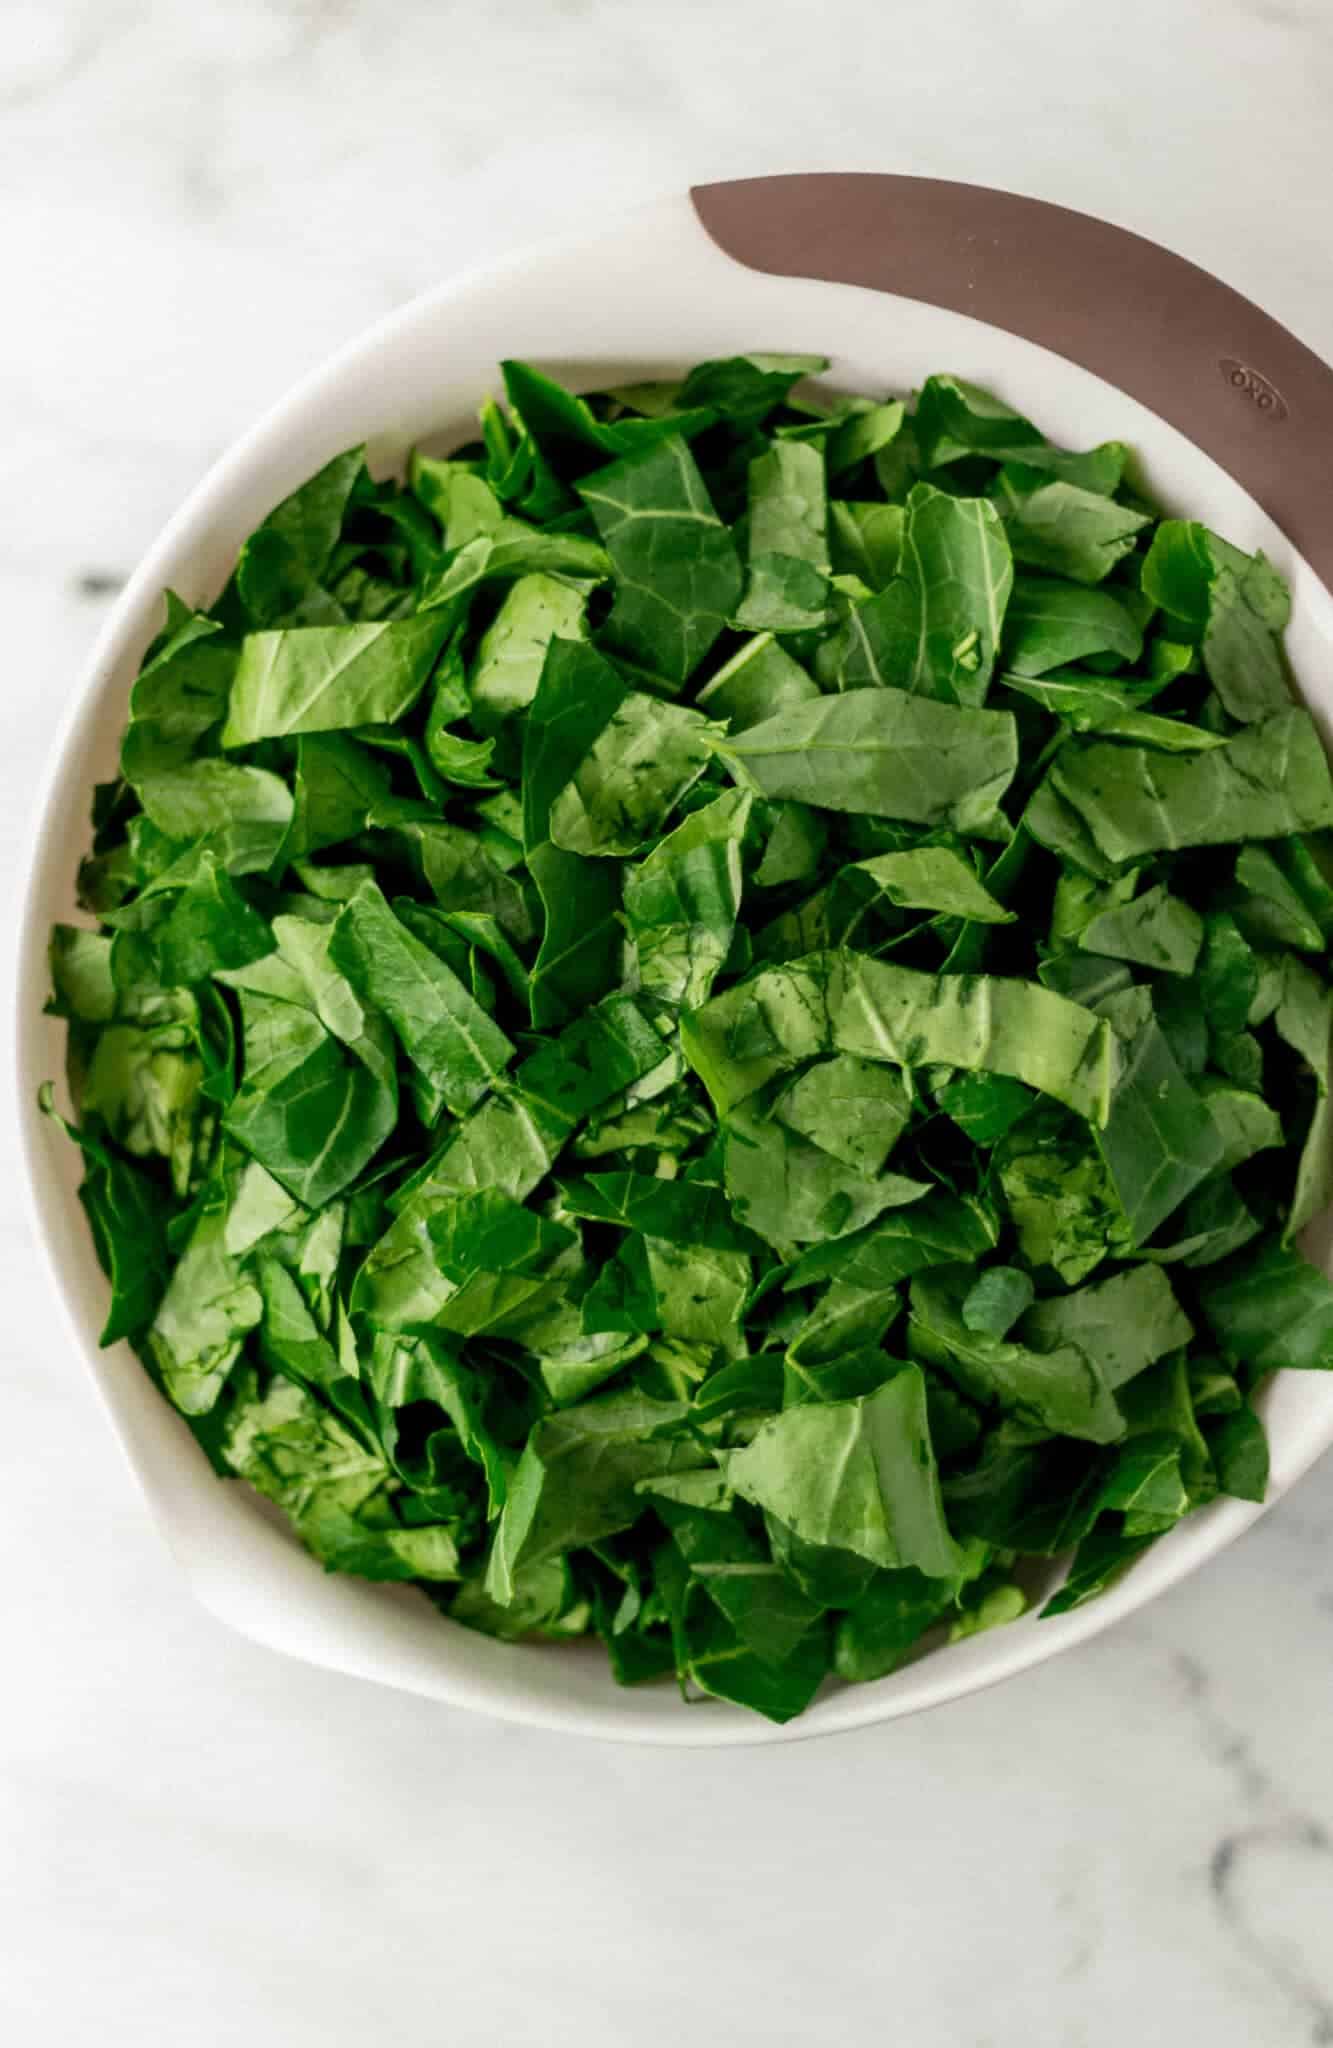 cleaned and cut up fresh collard greens in large white bowl 